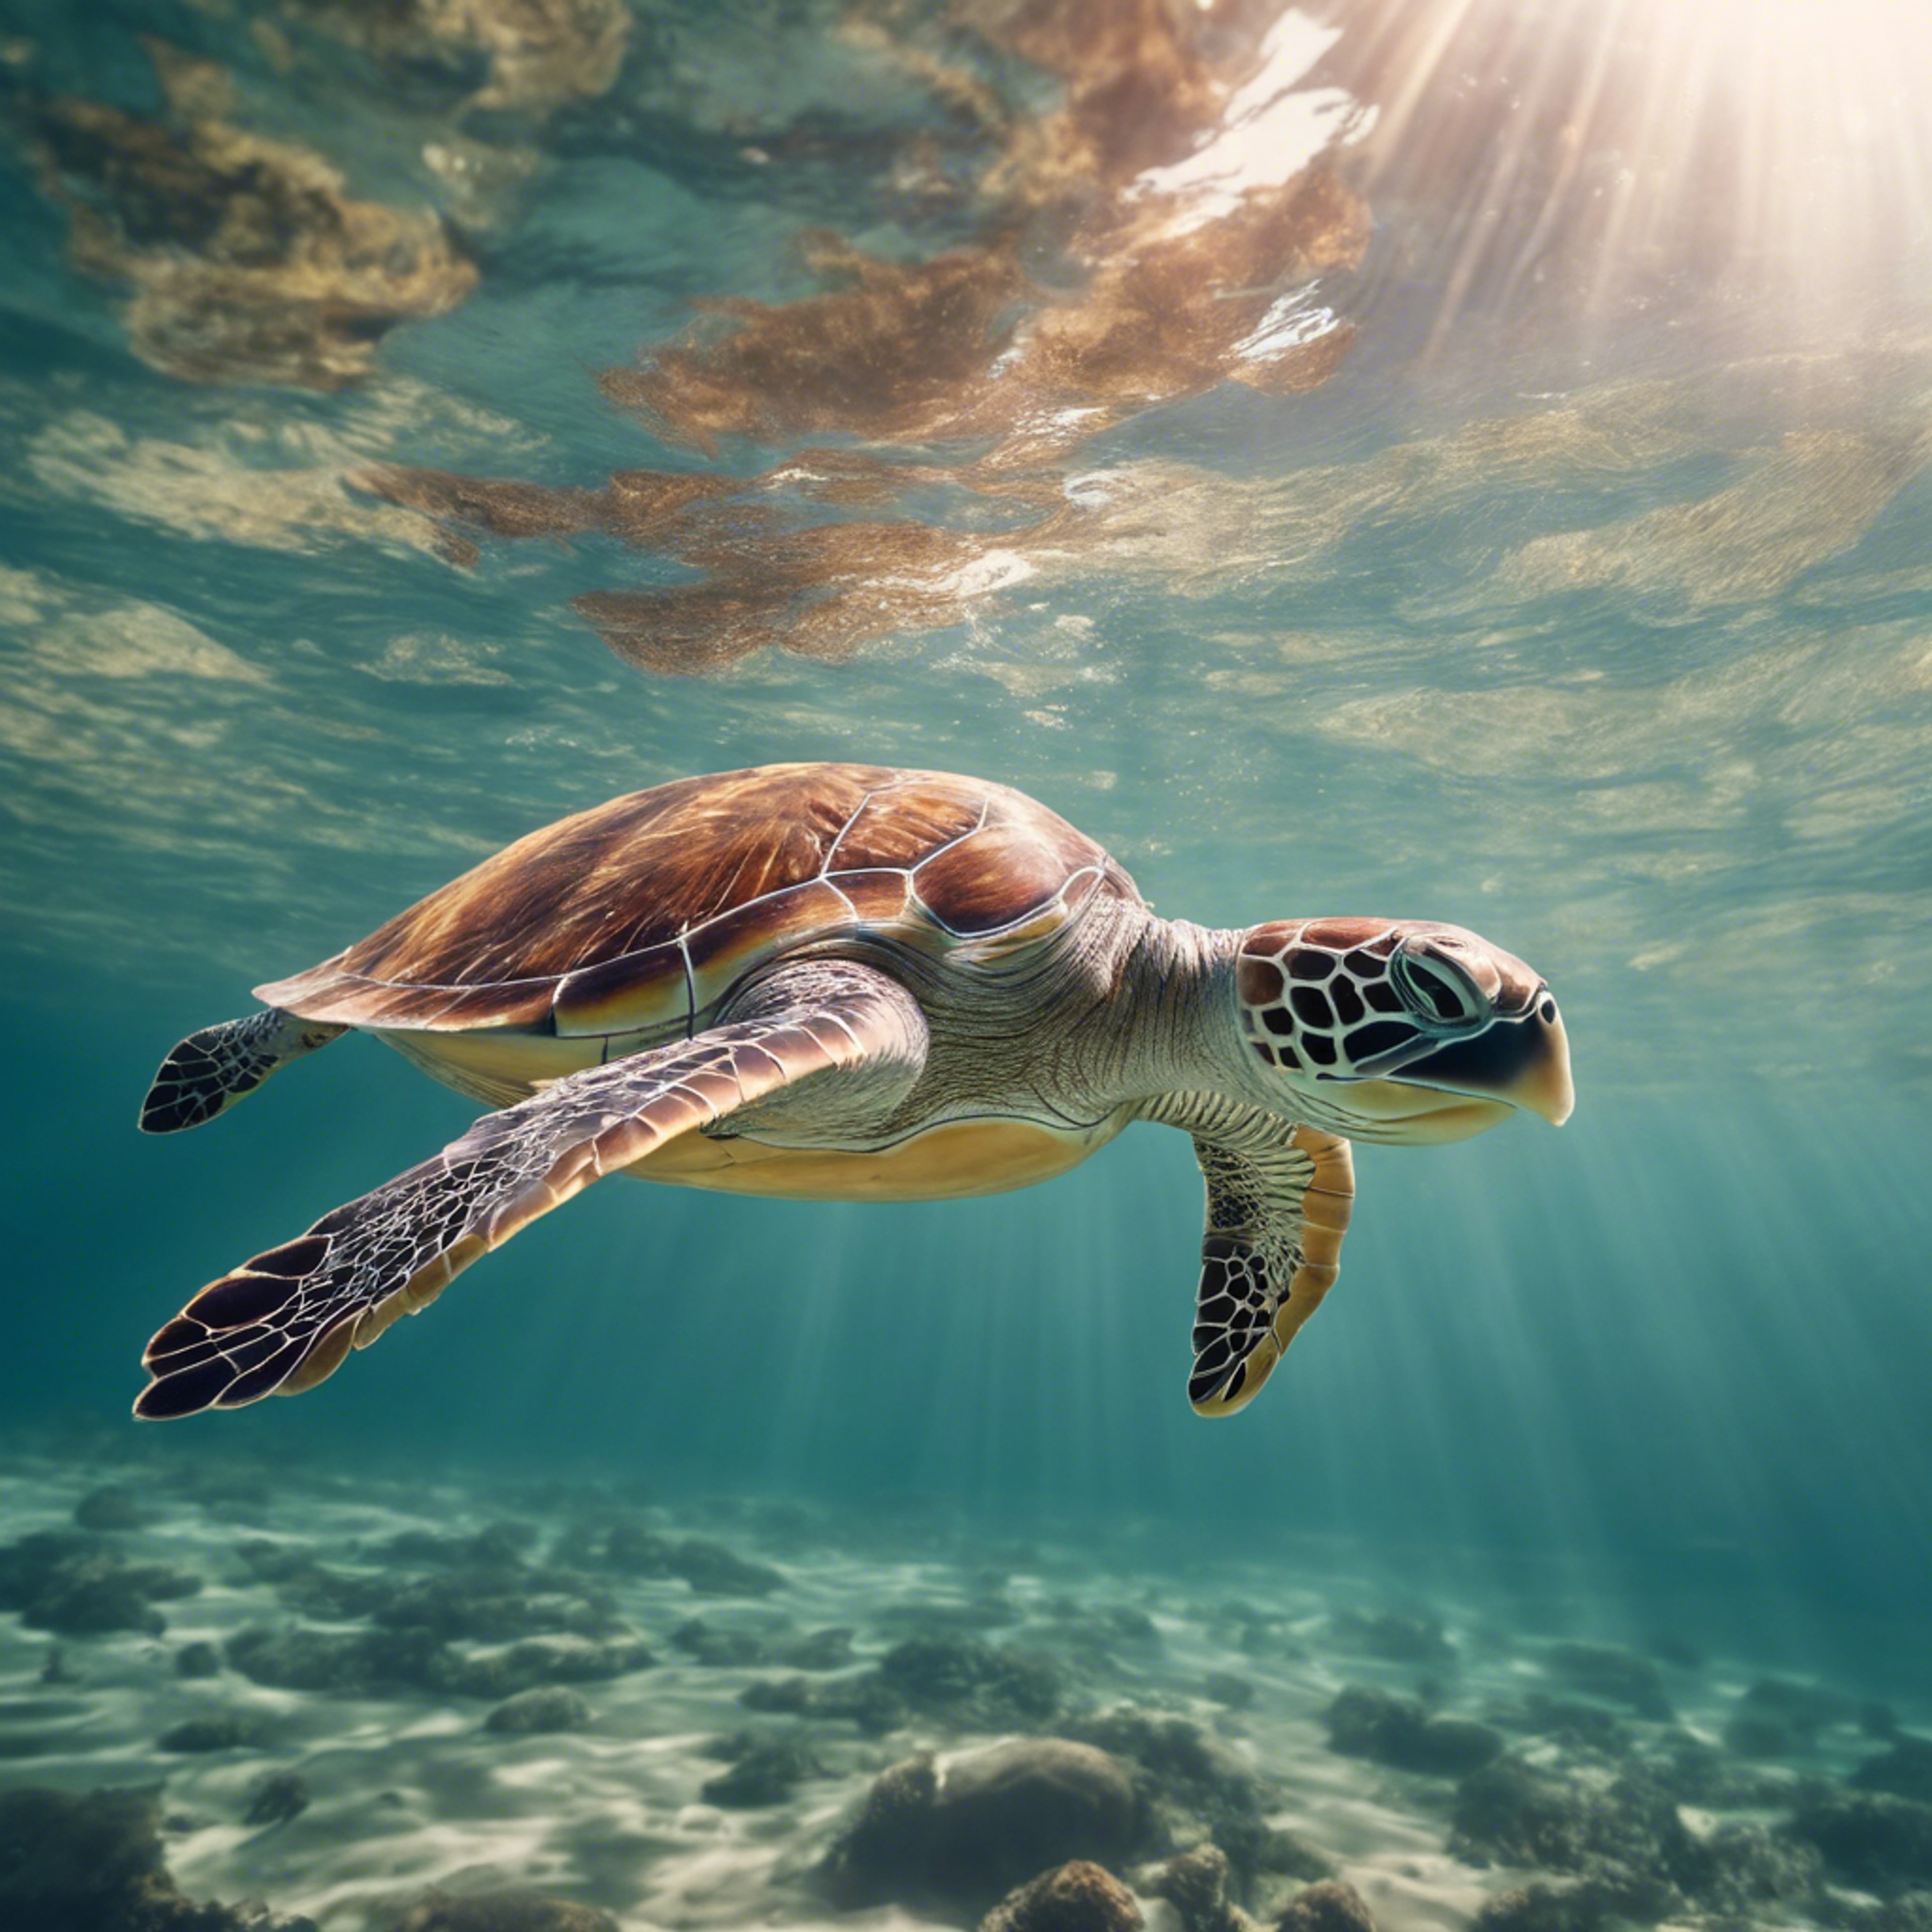 Sea turtle swimming leisurely in the ocean, with the sun penetrating the surface of the water above. Hintergrund[52b0564e310d4ce7b781]